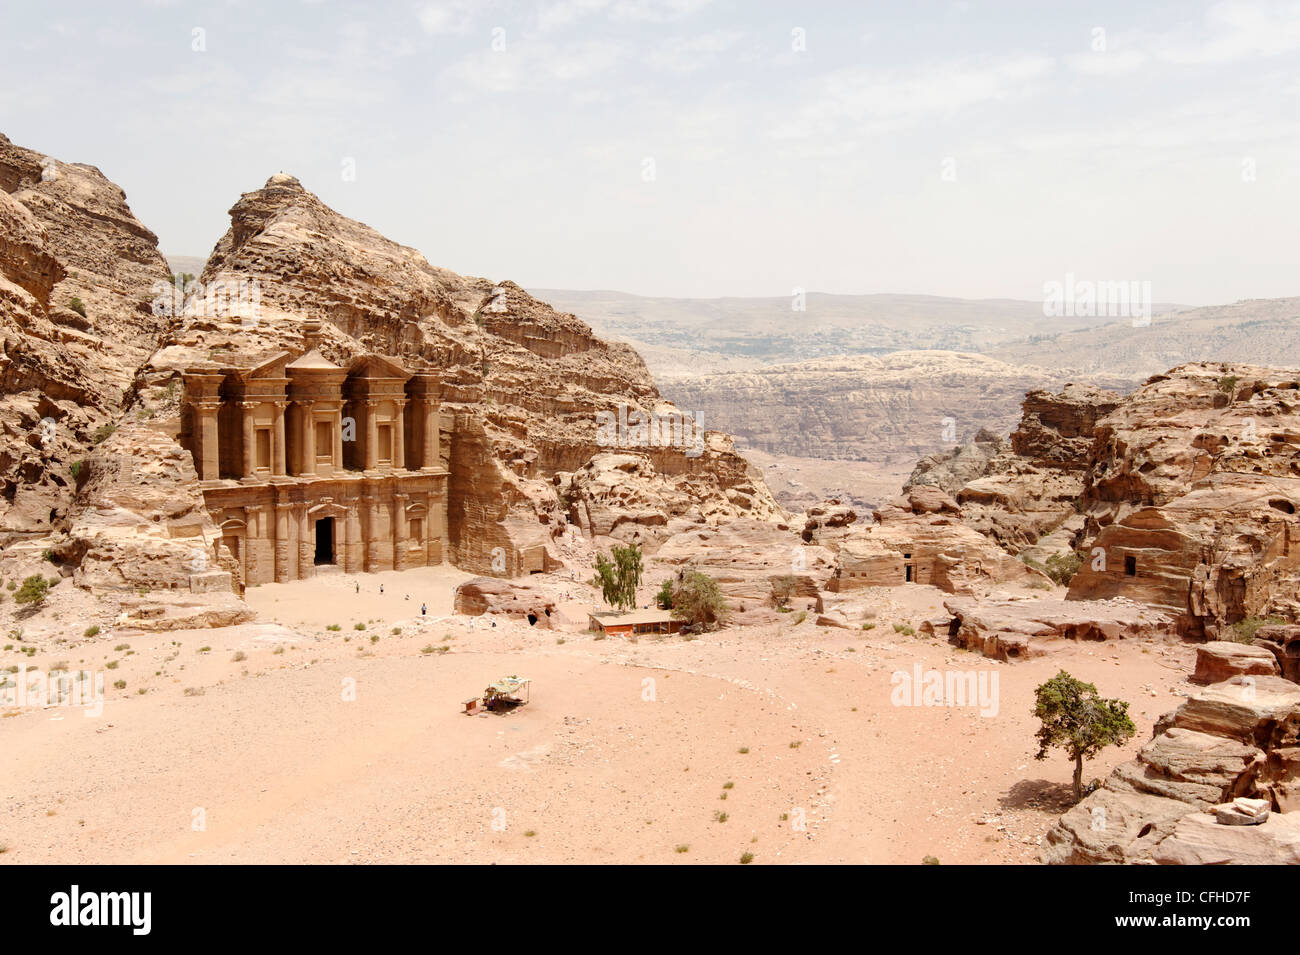 Jordan. Sweeping view of the legendary Monastery which is the most awe inspiring monument at ancient rose red city of Petra. Stock Photo